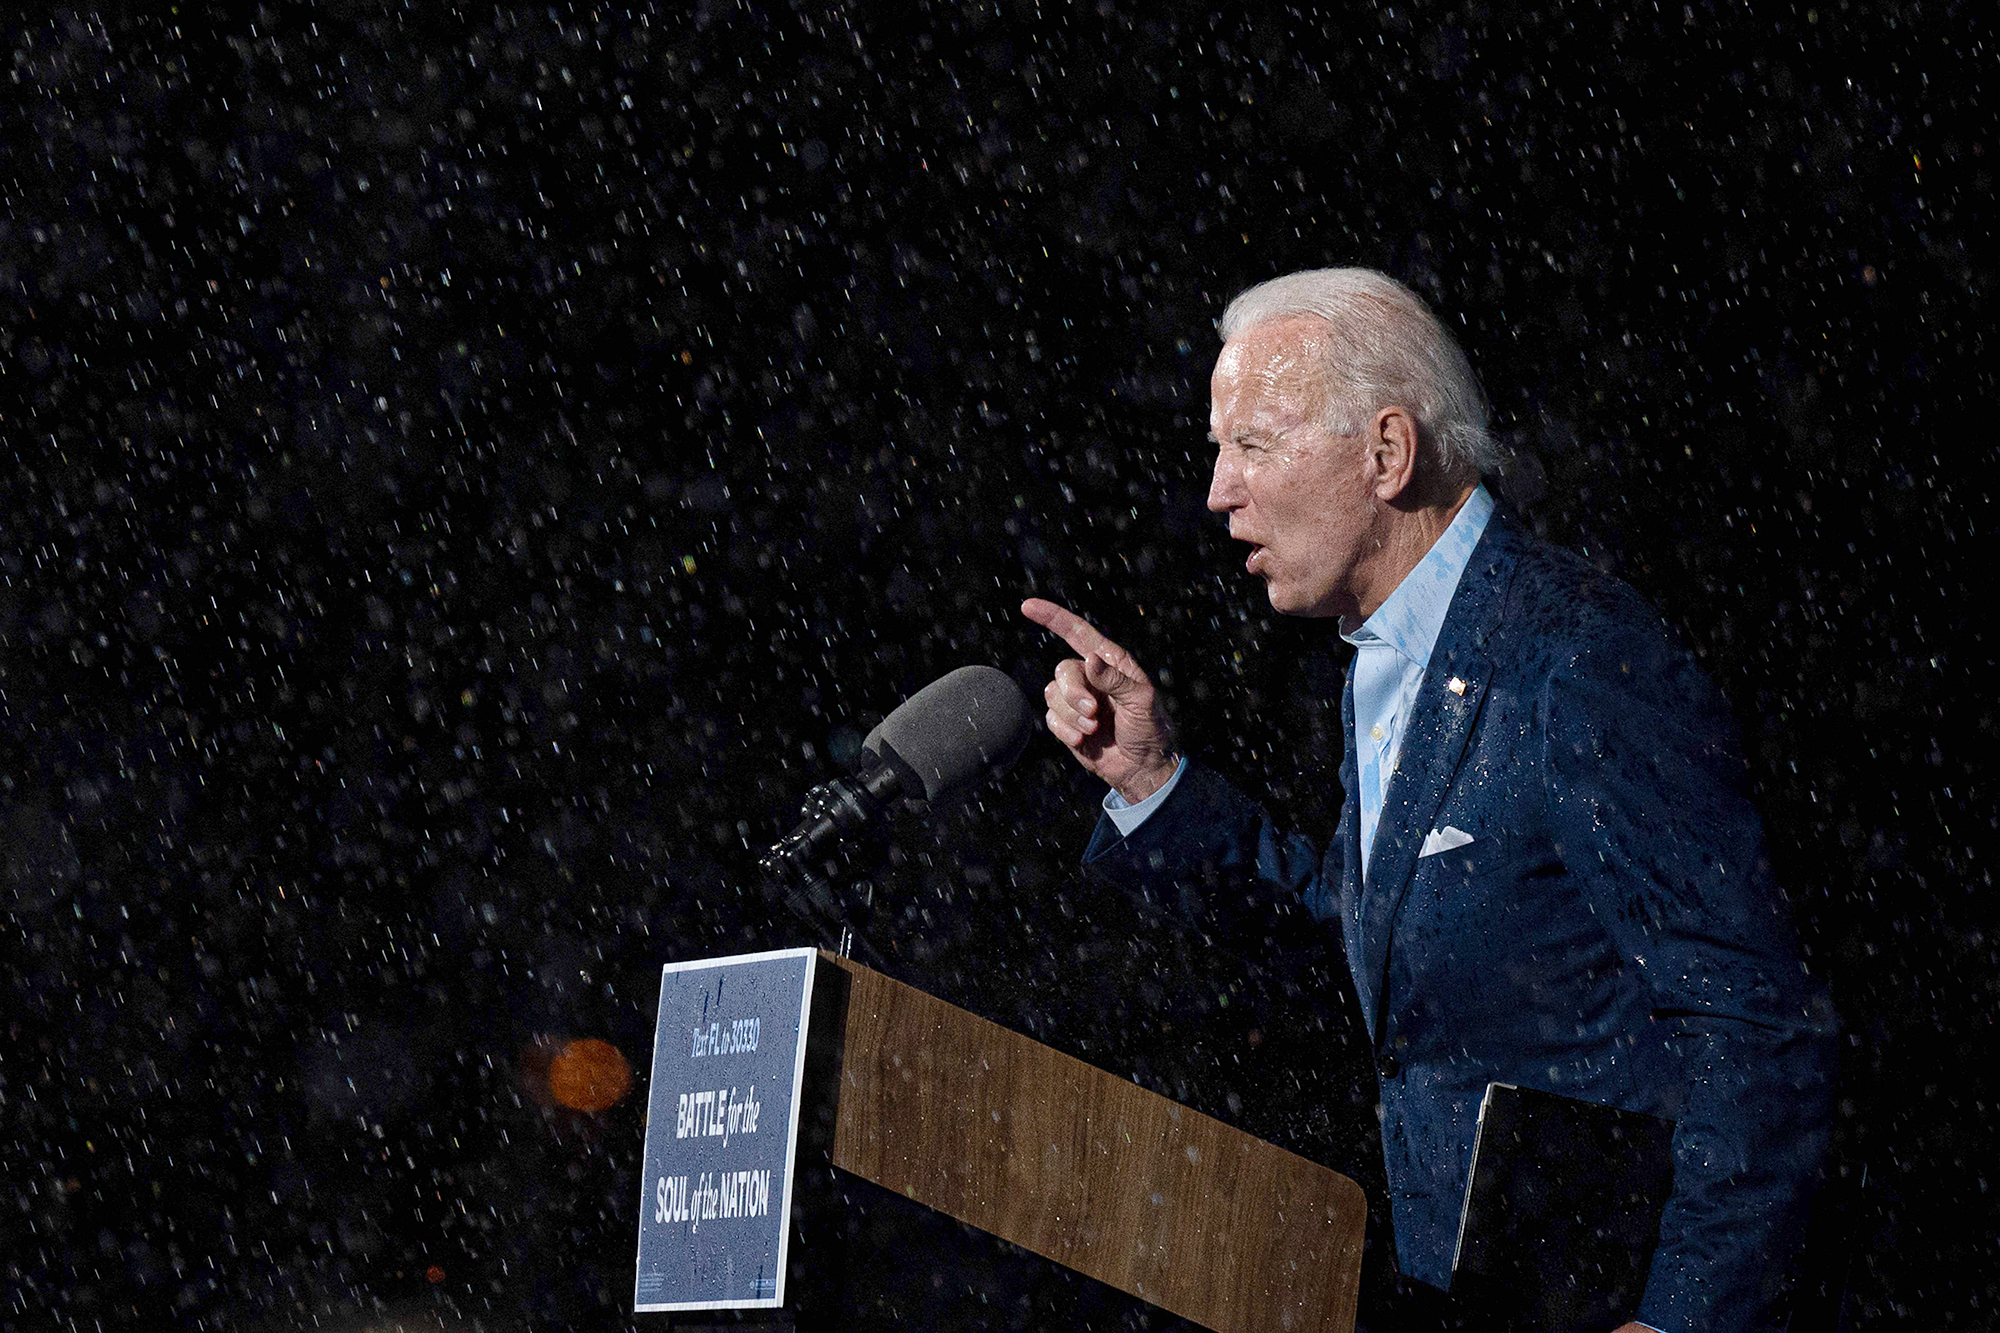 PHOTO: Former vice-president and Democratic presidential nominee Joe Biden delivers remarks in the rain during a Drive-In event in Tampa, Fla., Oct. 29, 2020.